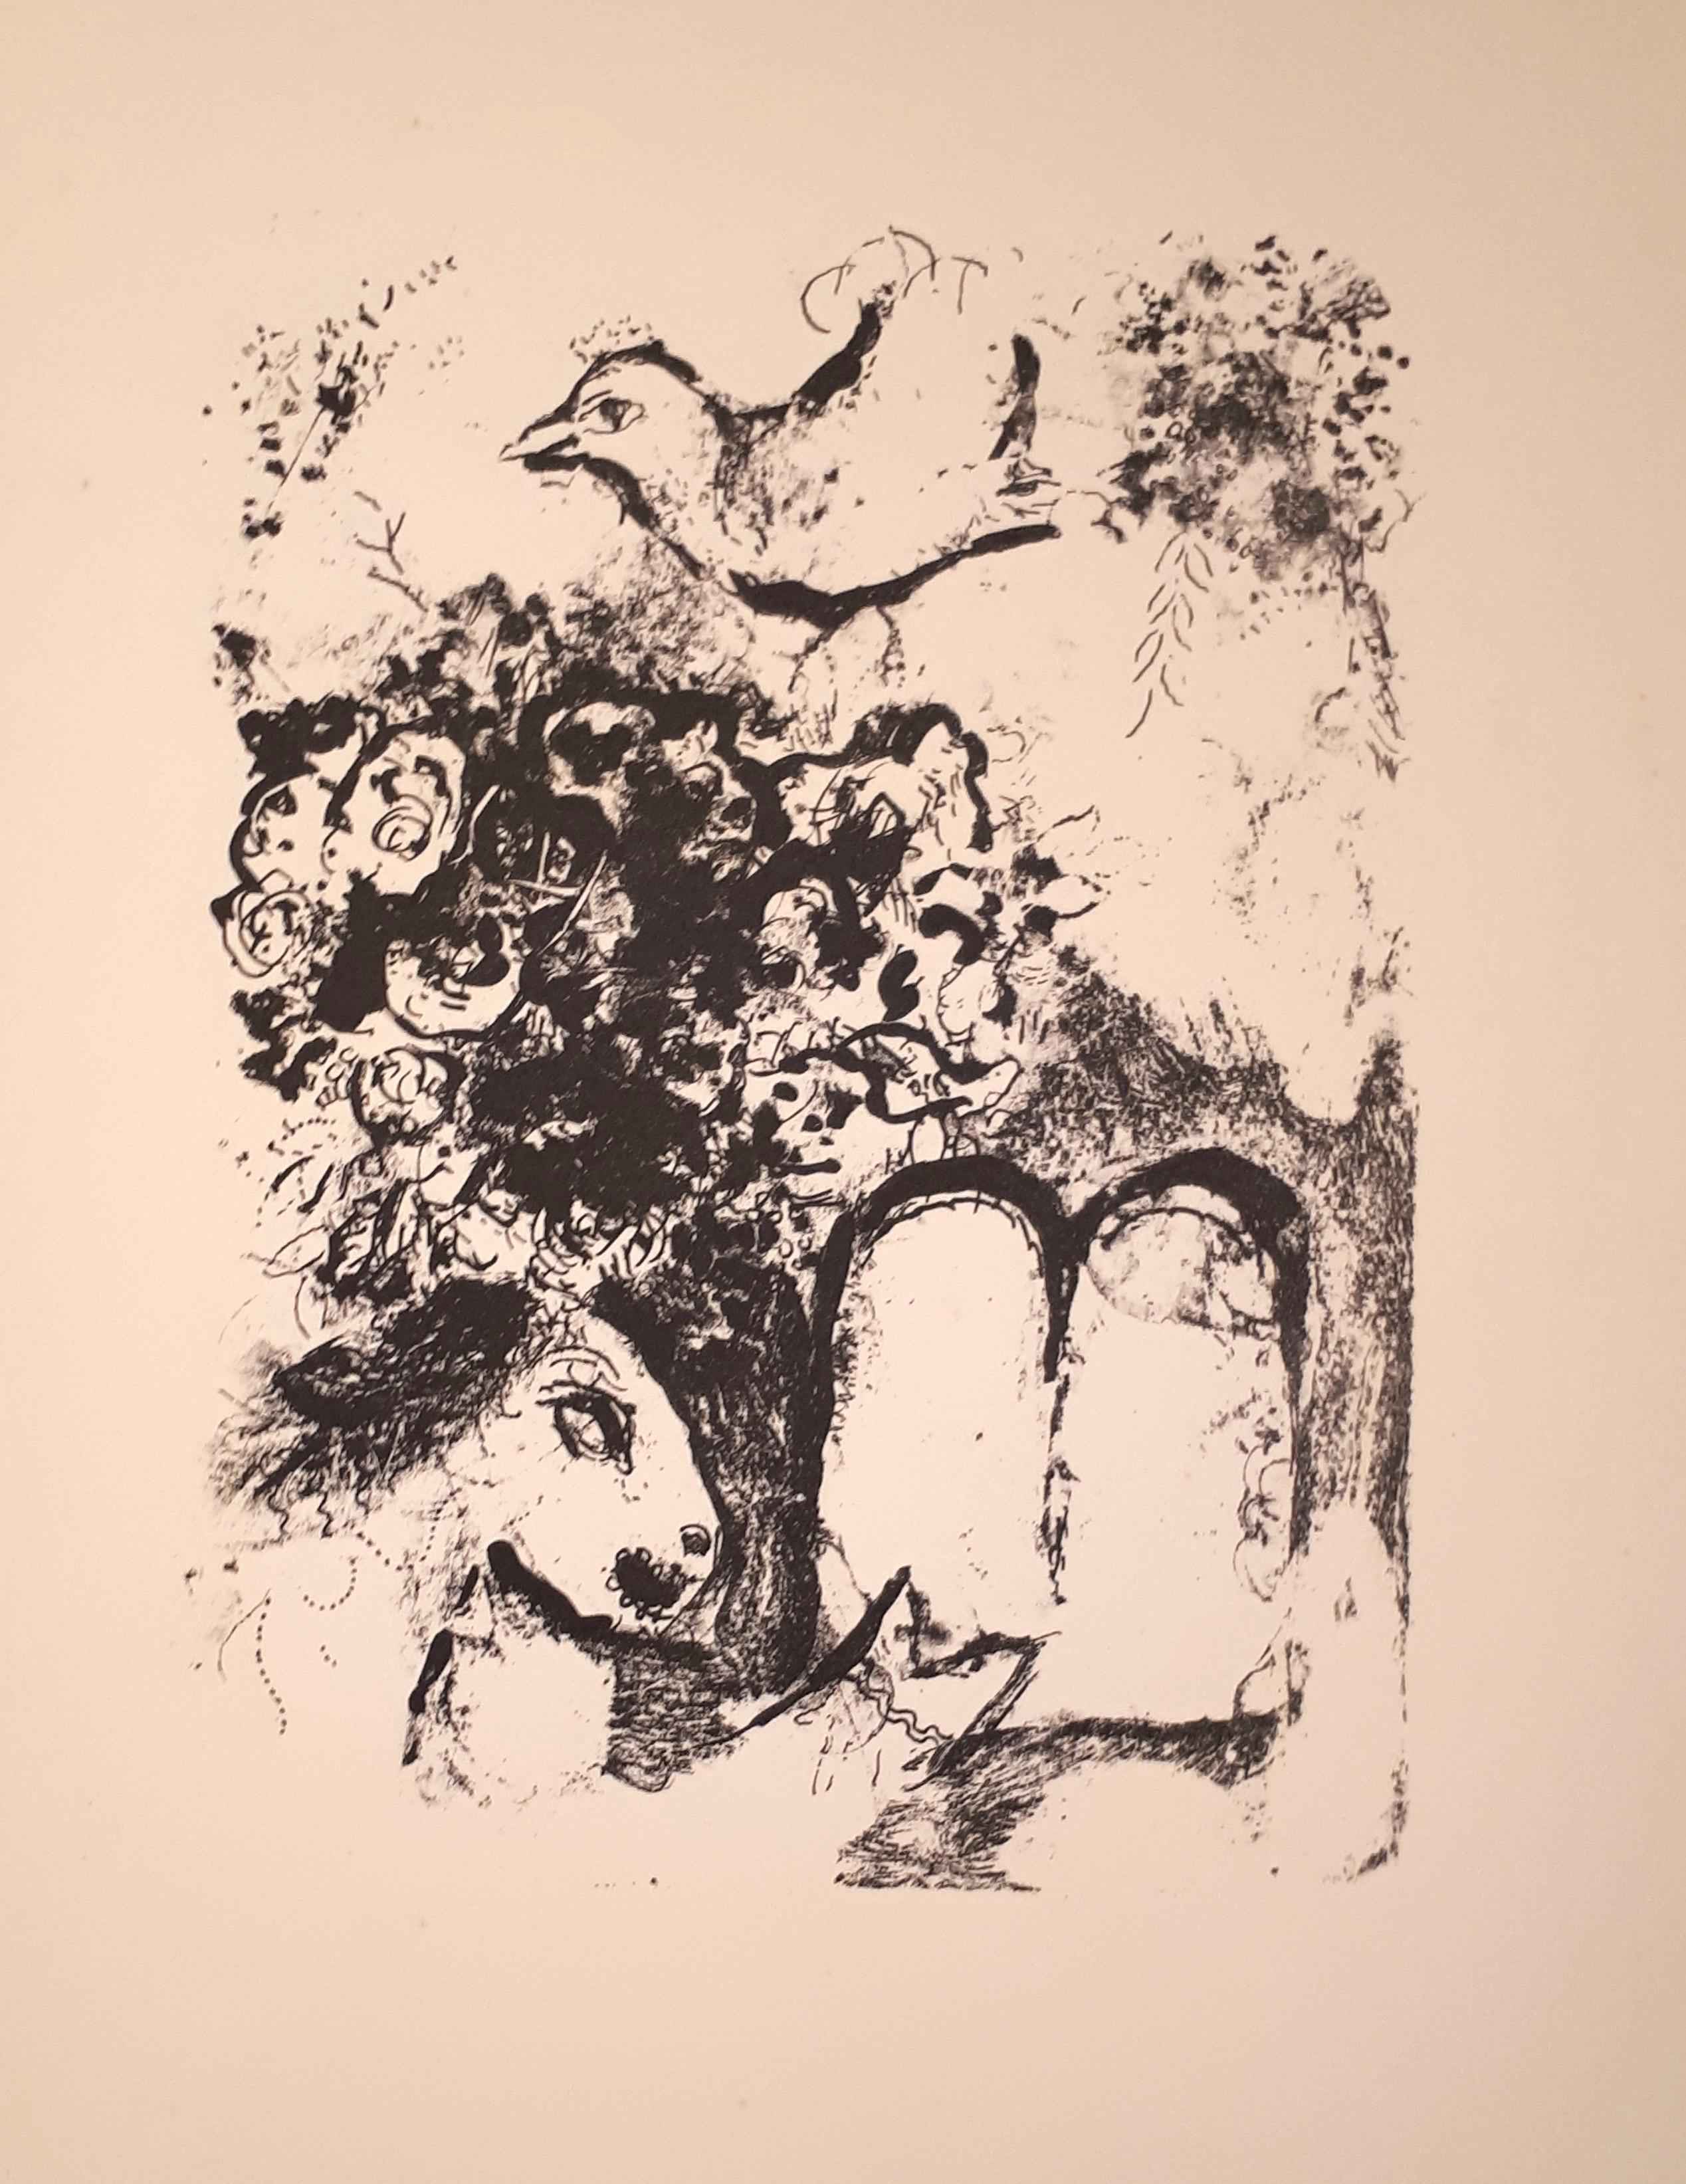 Vitraux pour Jérusalem - Illustrated Book by M. Chagall, 1962 - Surrealist Print by Marc Chagall